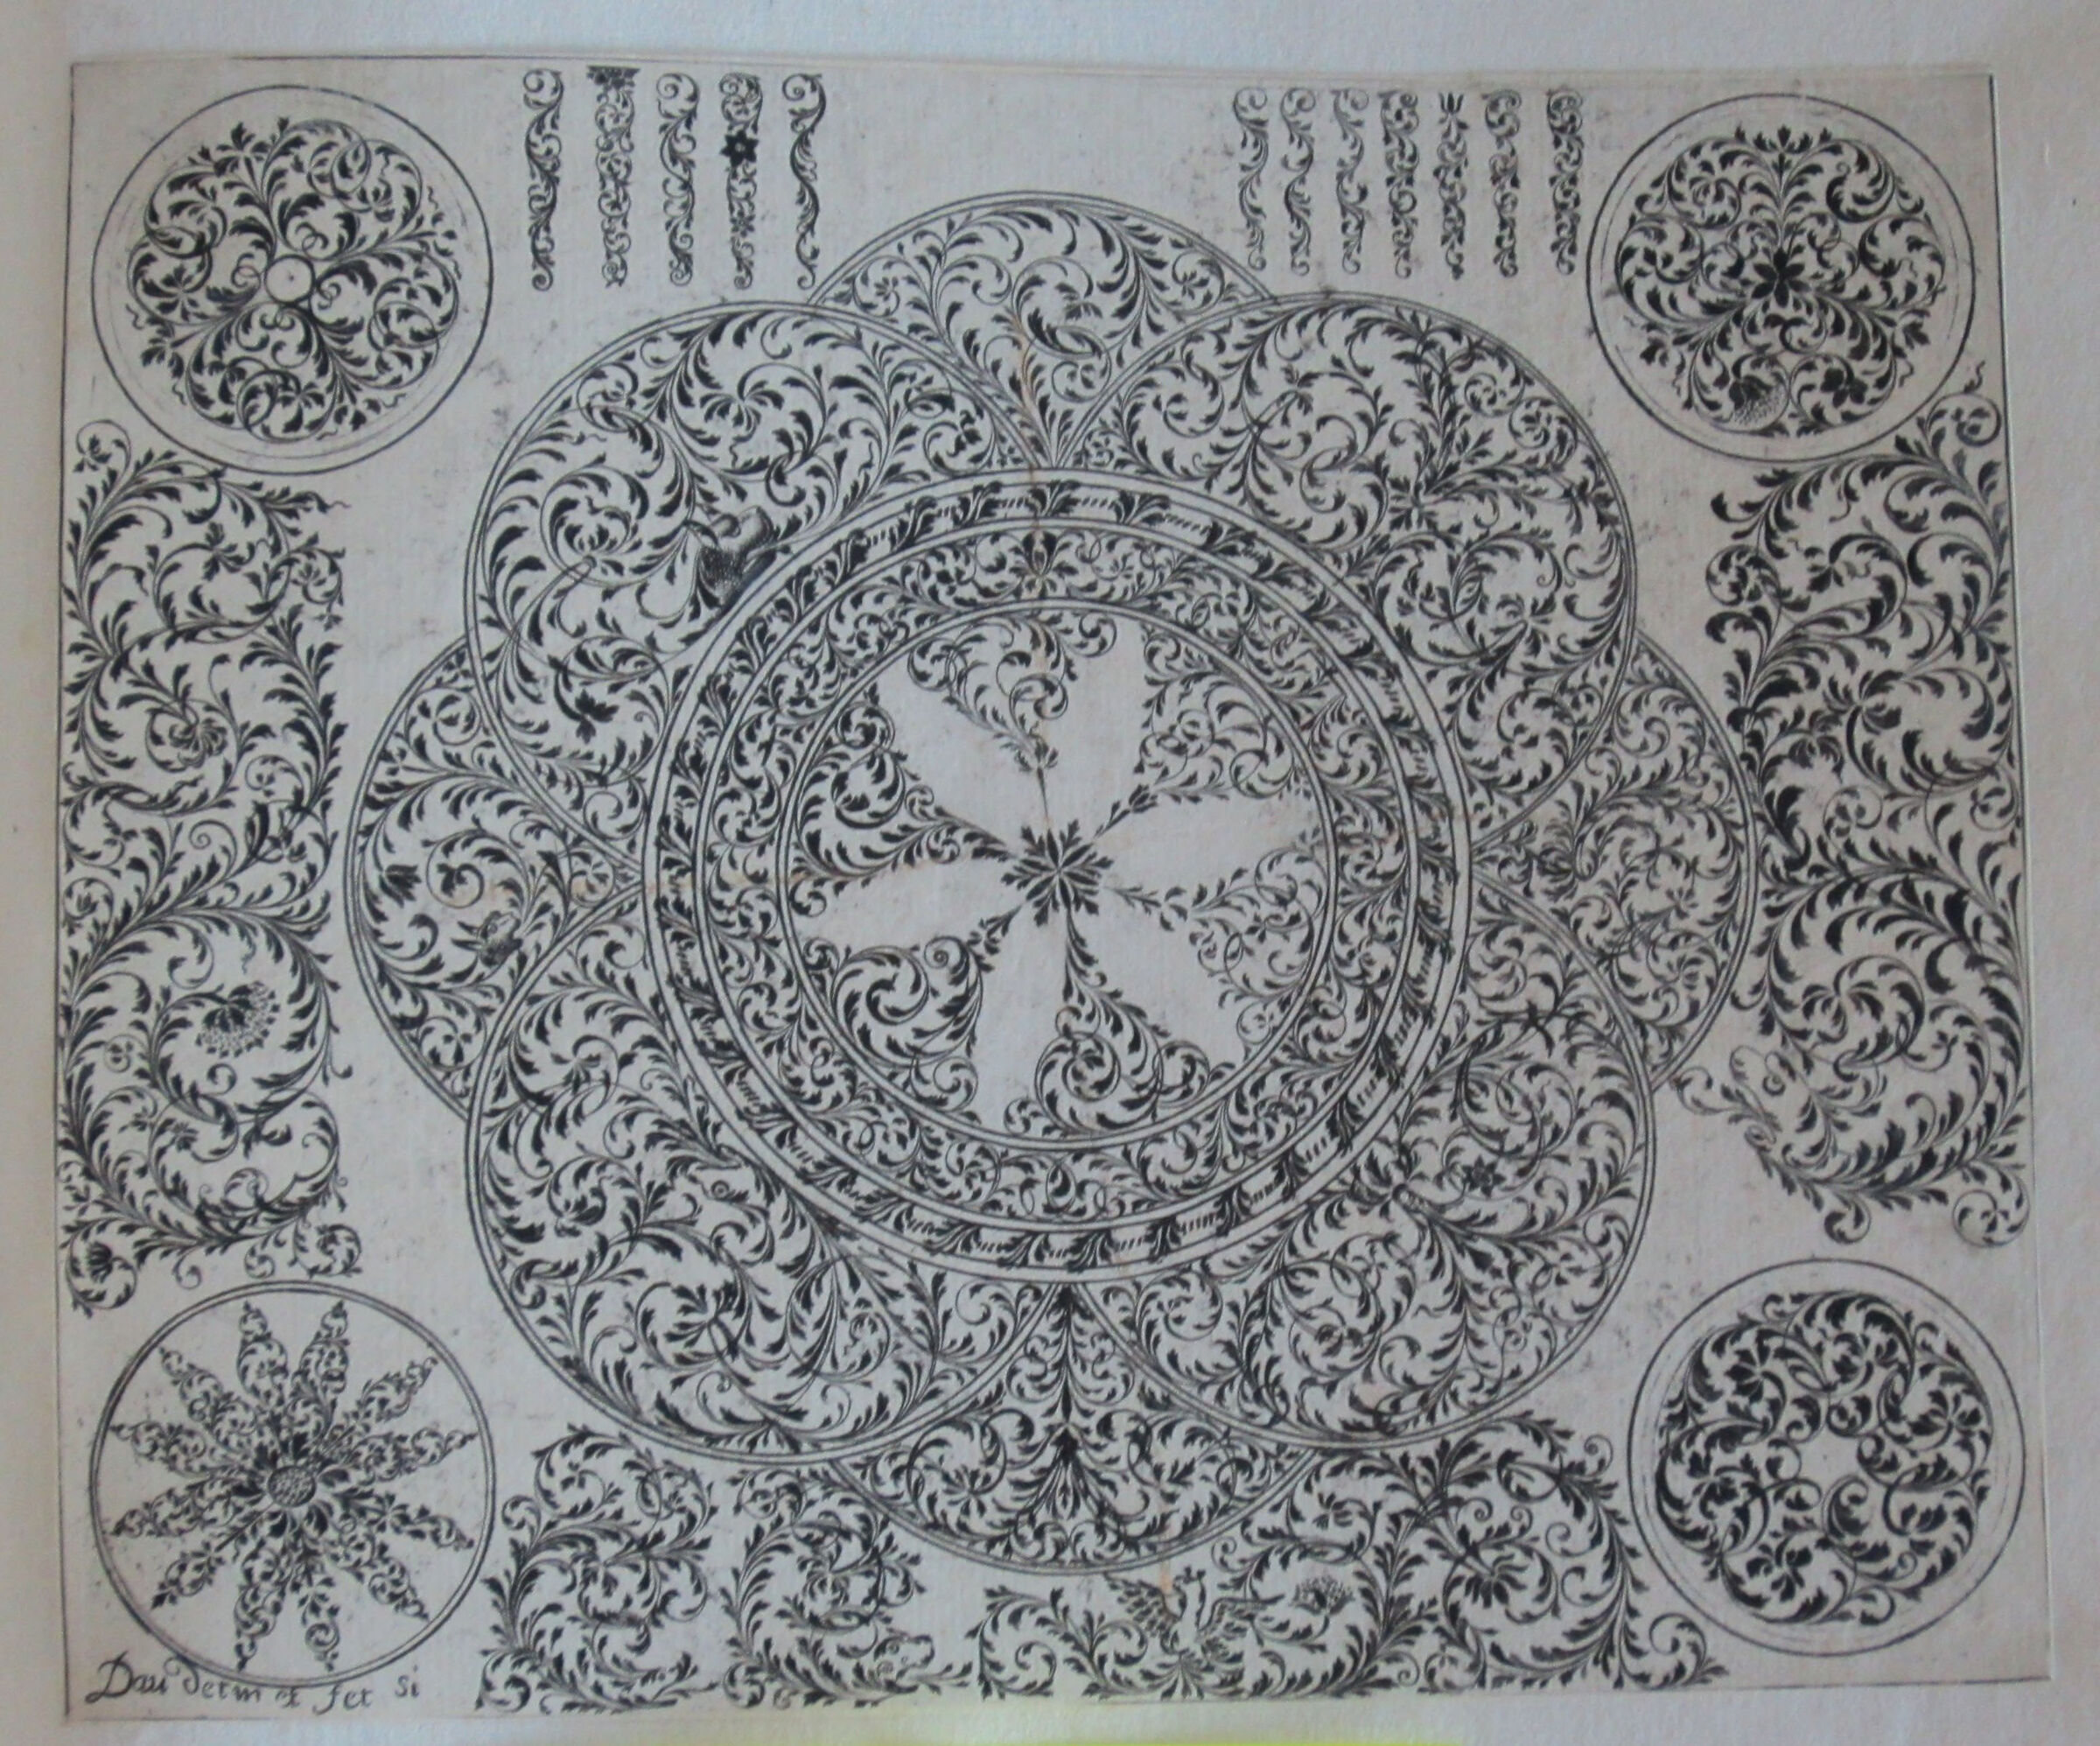 Foliate Moresque Designs Centered By A Large Lobed Circle With A Six-Petaled Motif At Its Center